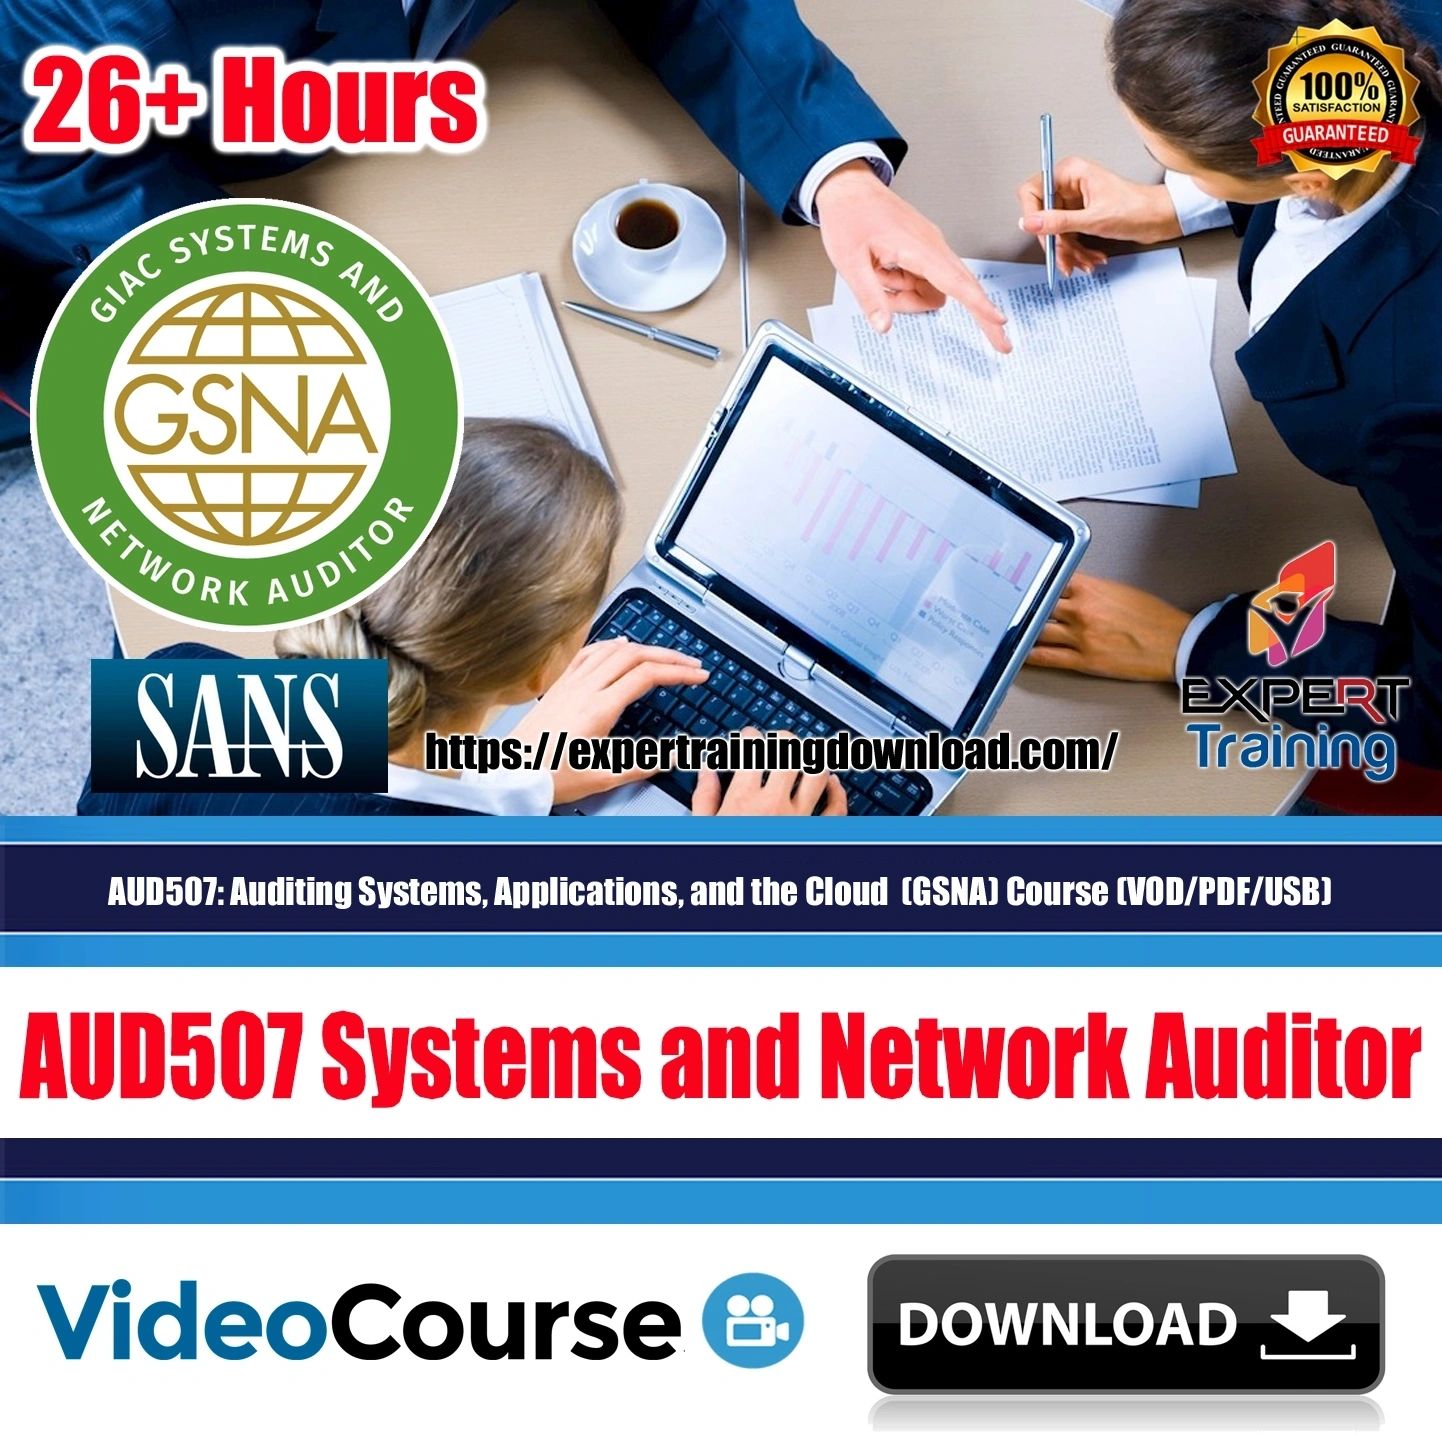 AUD507 Auditing Systems, Applications, and the Cloud (GSNA) Course (VoD/PDF/USB)